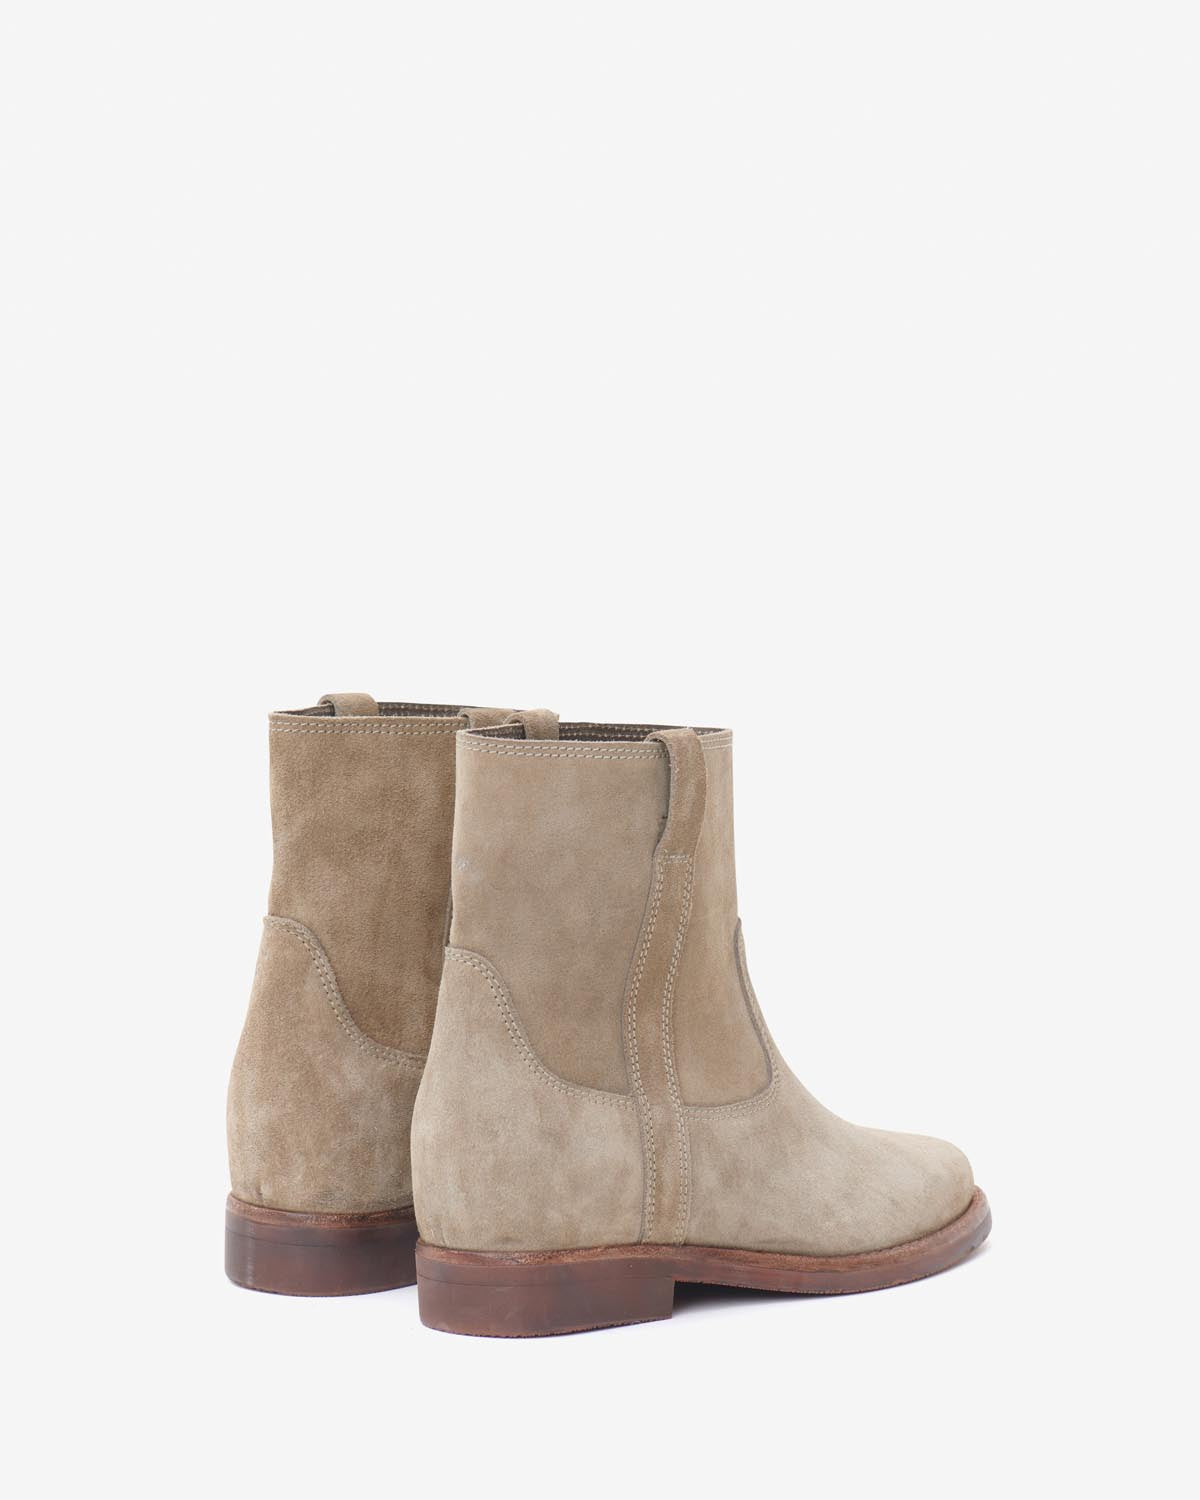 Boots susee Woman Taupe 2